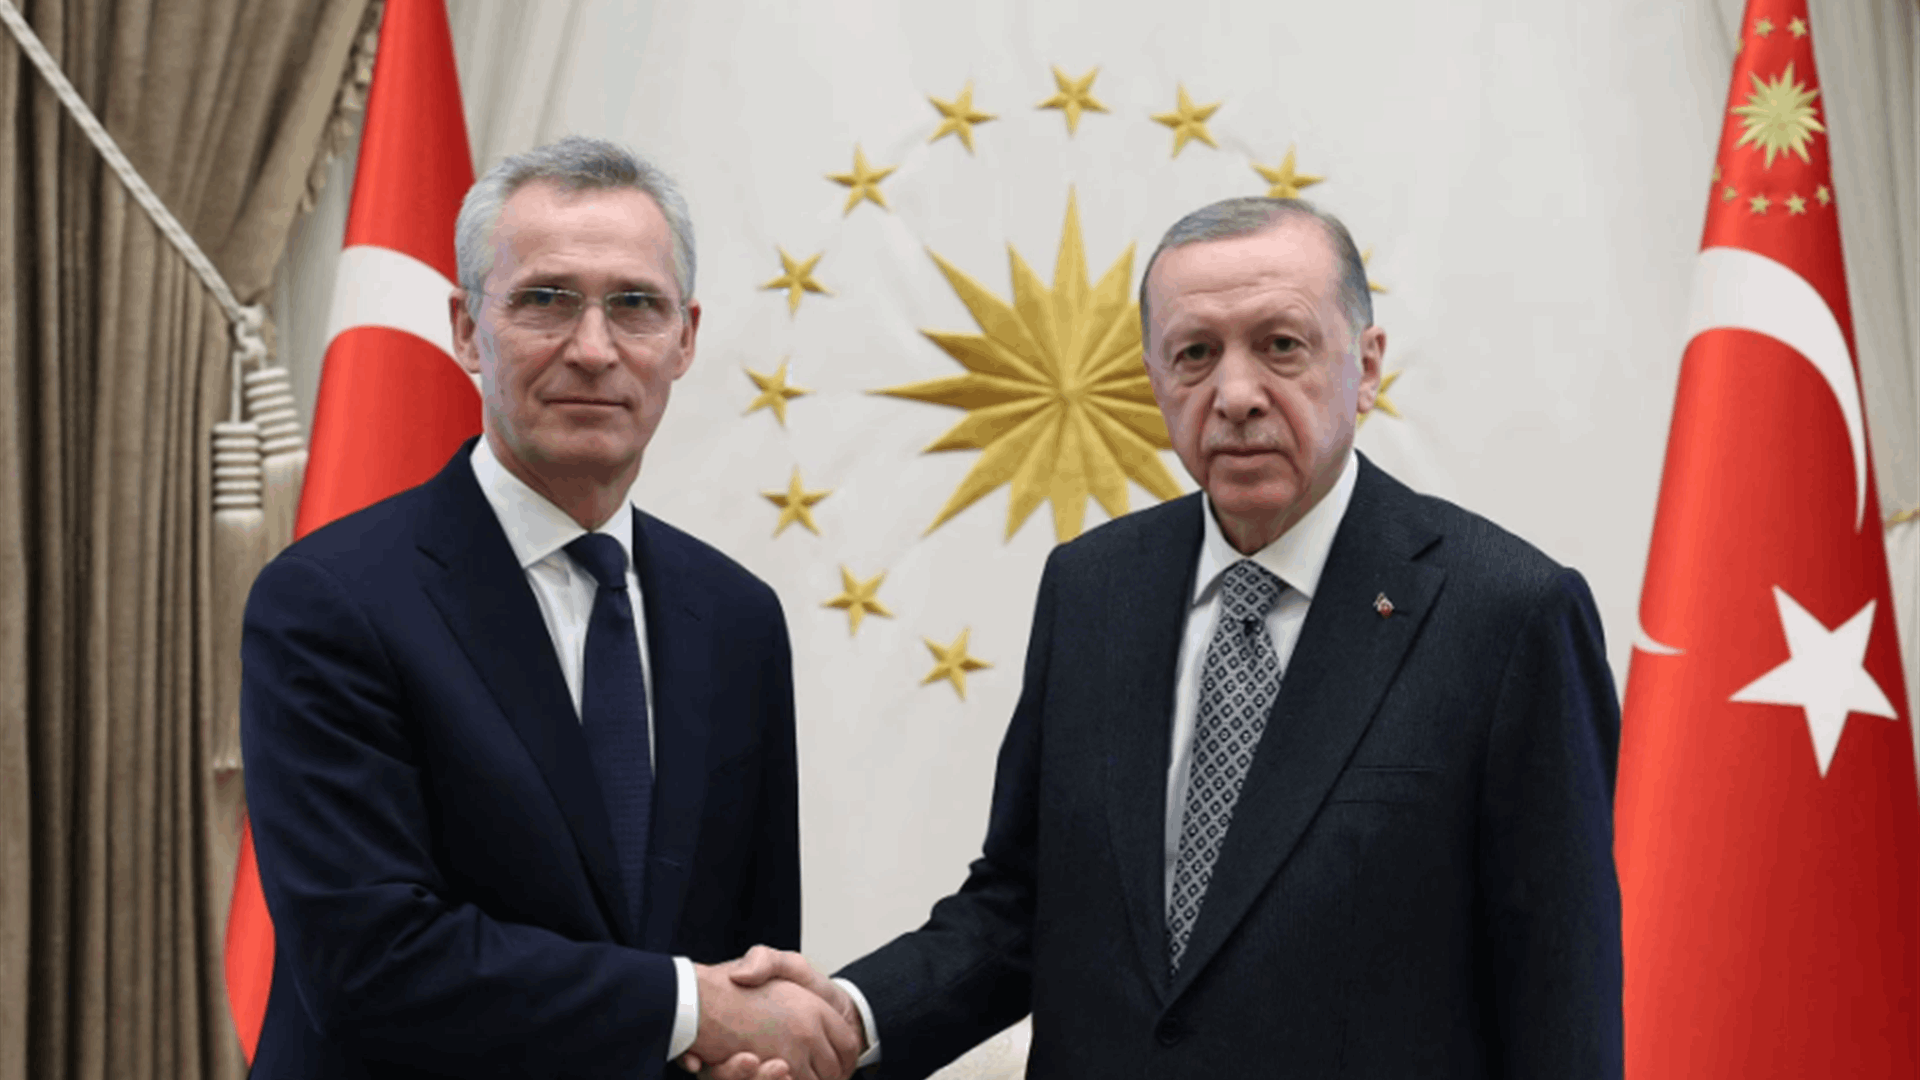 NATO chief says &#39;time is now&#39; for Turkey to ratify Finland and Sweden membership bids